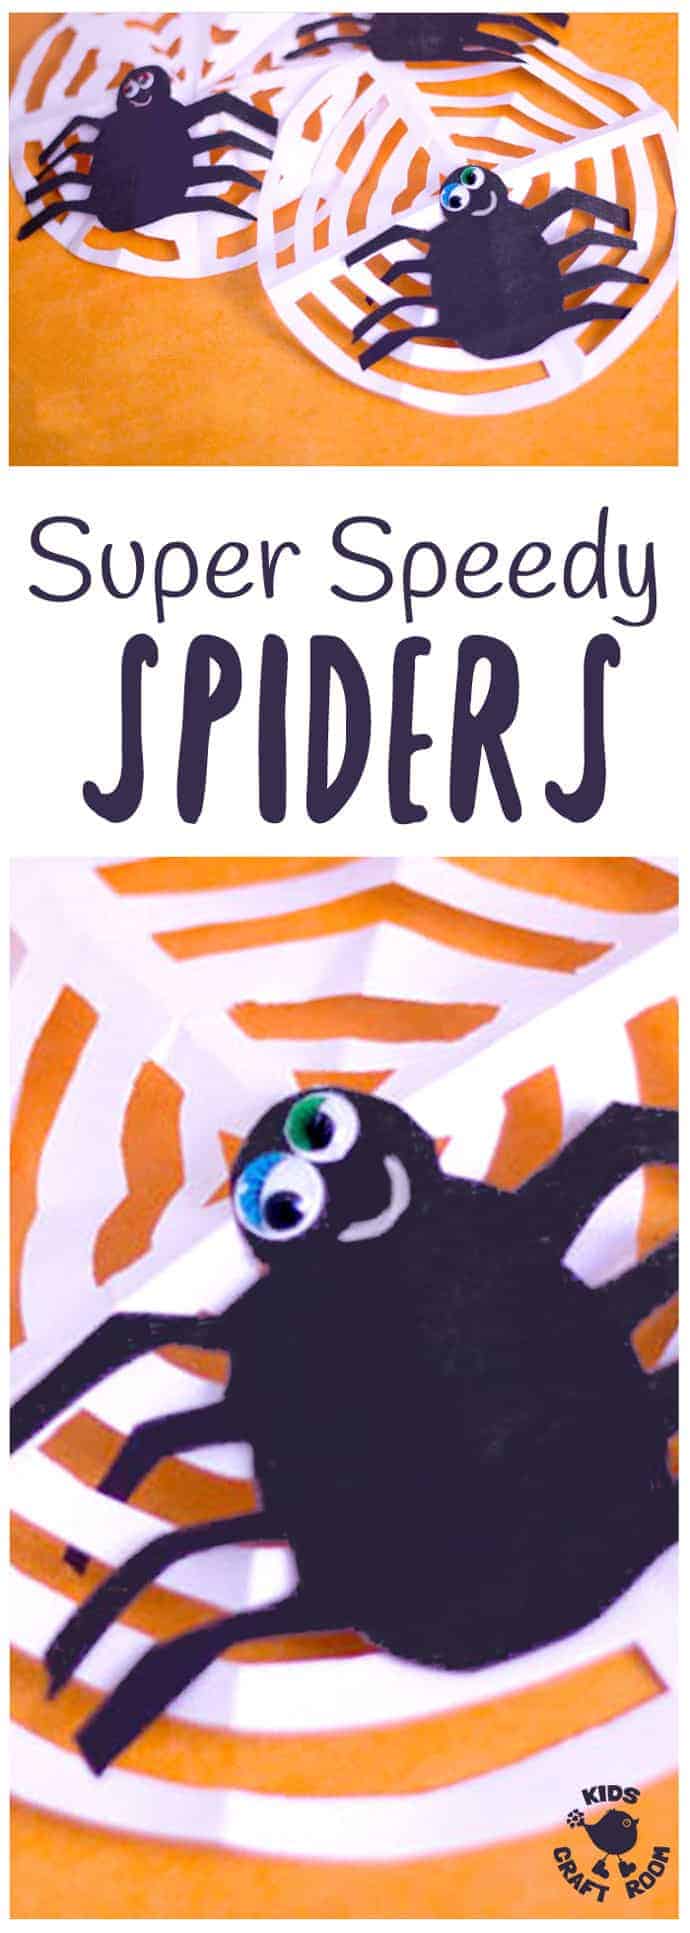 SPEEDY SPIDER CRAFT - Make quick spider decorations in minutes. Great as a Halloween spider craft or an Itsy Bitsy Spider activity. 